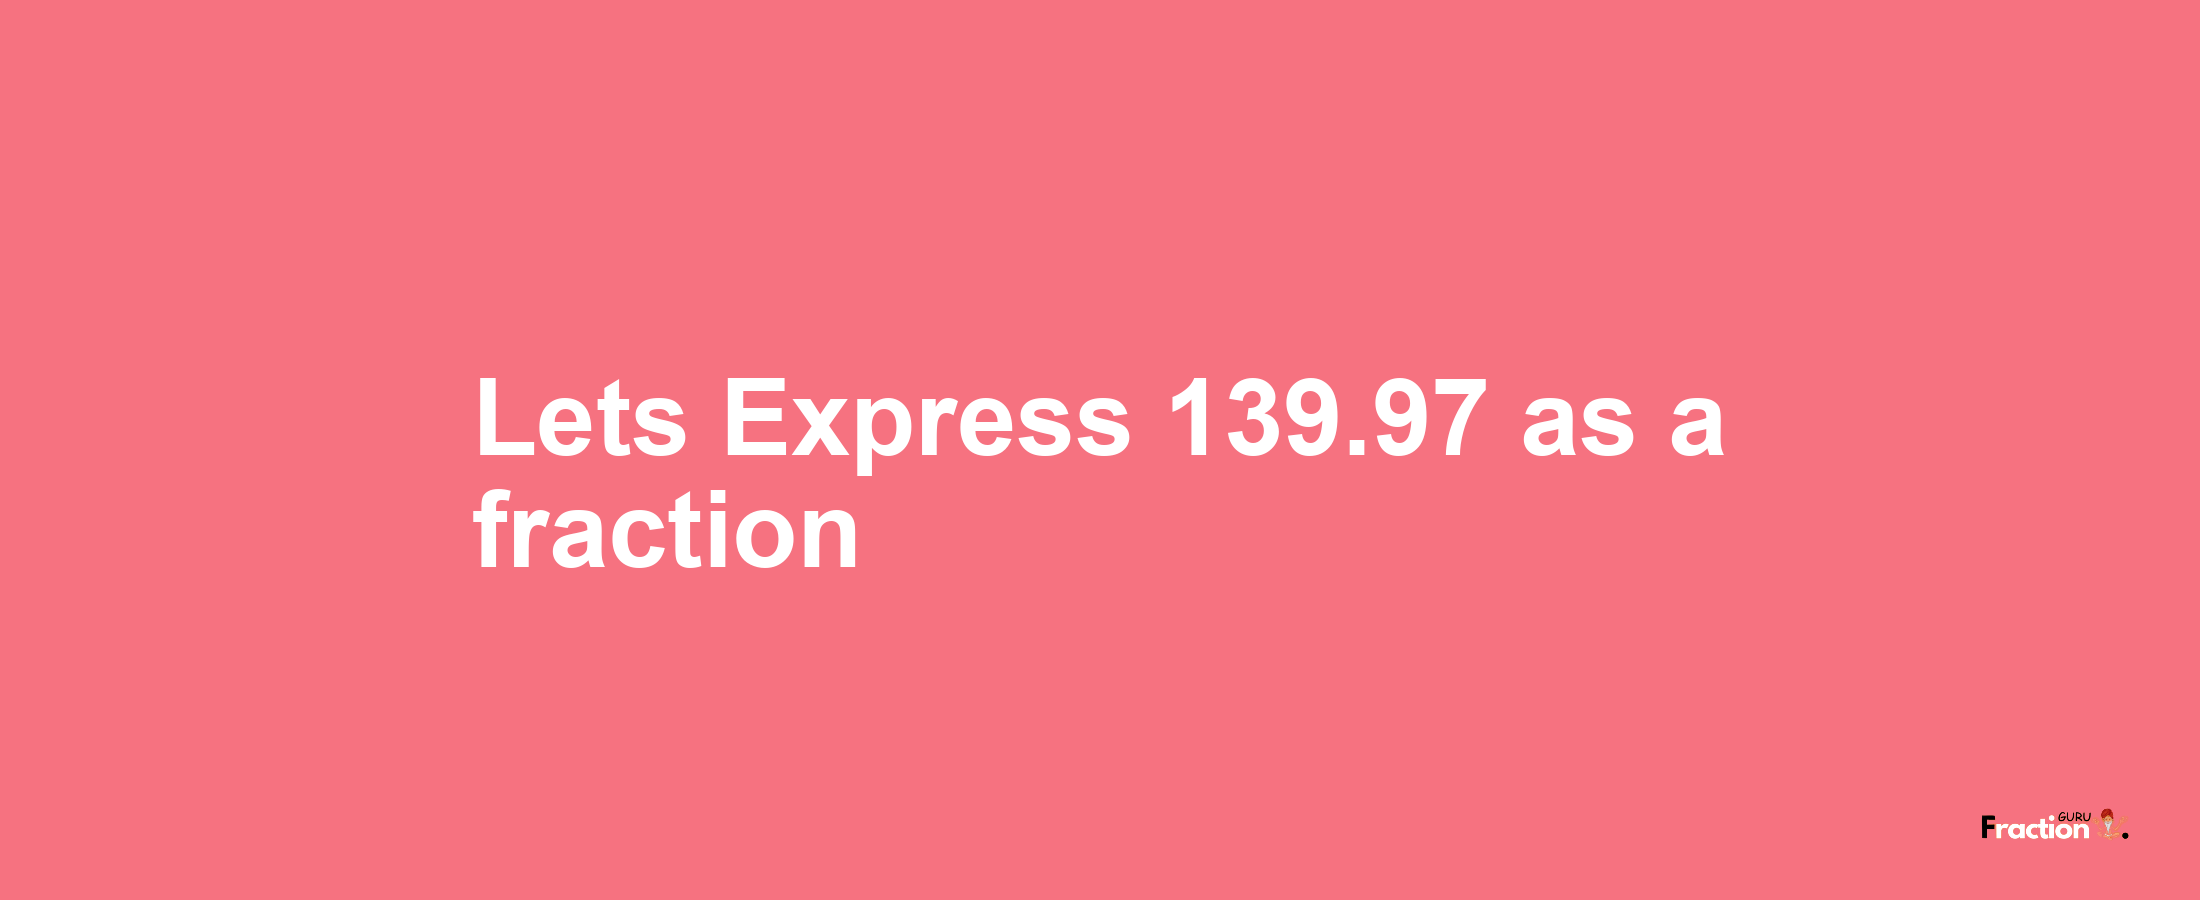 Lets Express 139.97 as afraction